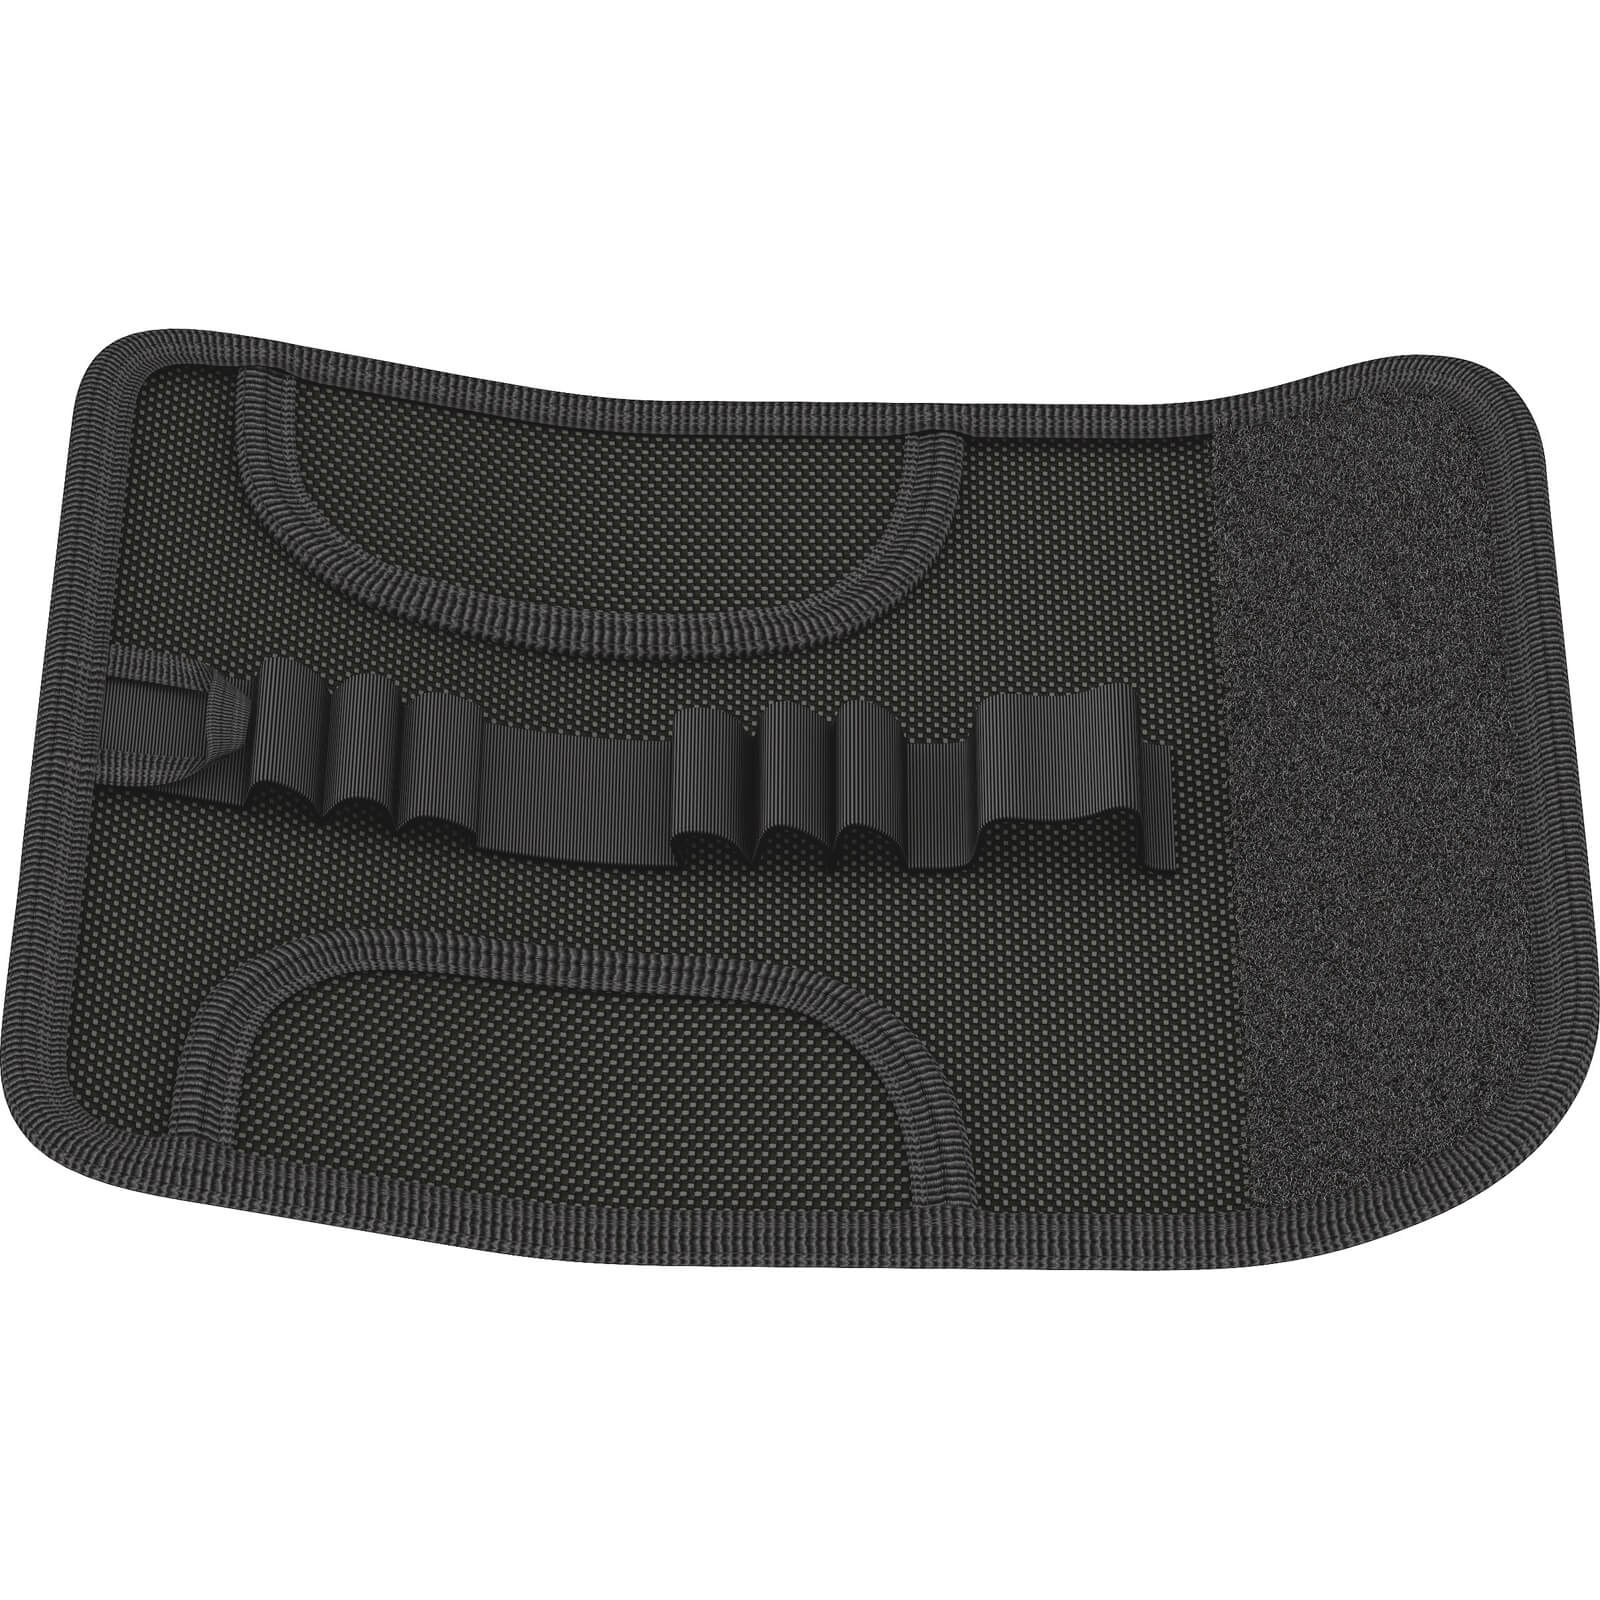 Image of Wera 9400 2Go Folding Tool Kit Pouch For Kraftform Compact